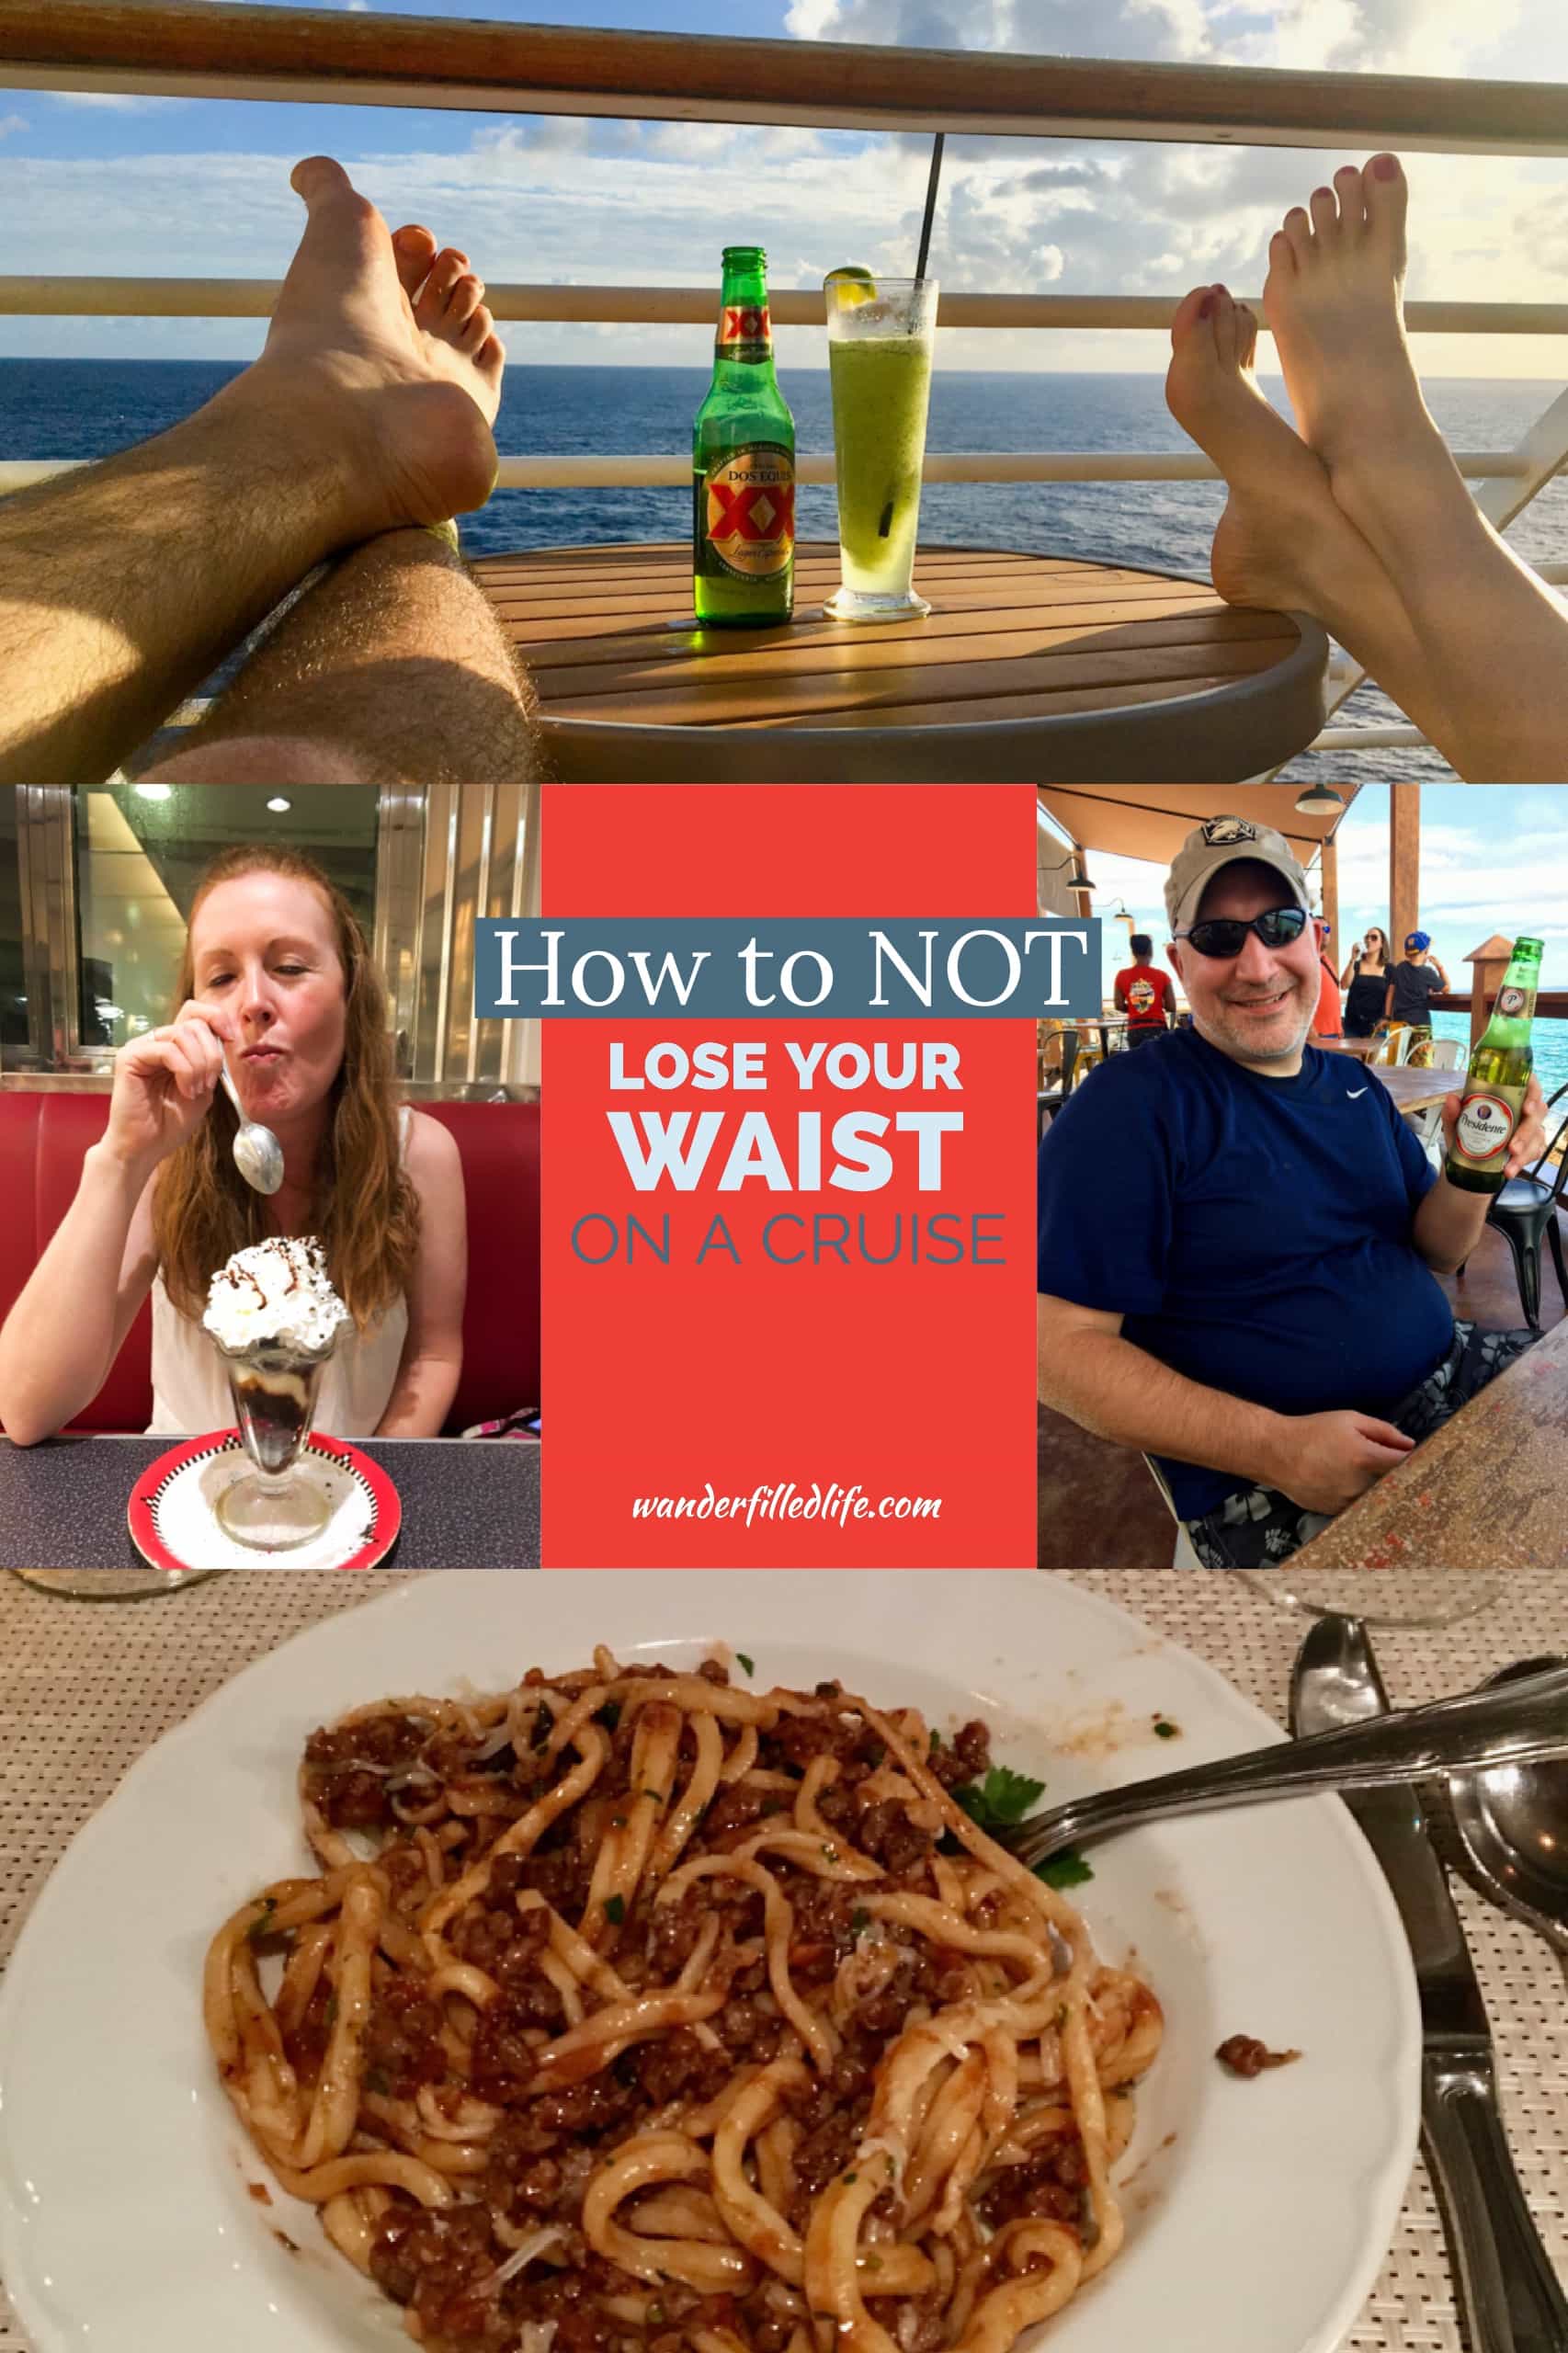 Tips for staying healthy and not gaining weight while on a cruise.